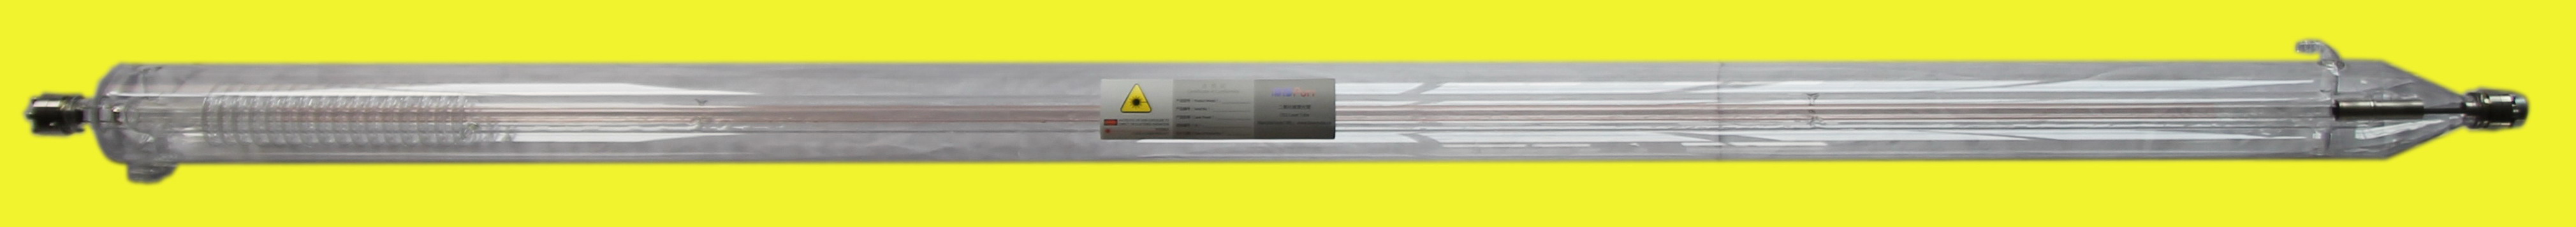 High Class Catalyst CO2 Laser Tube-H series